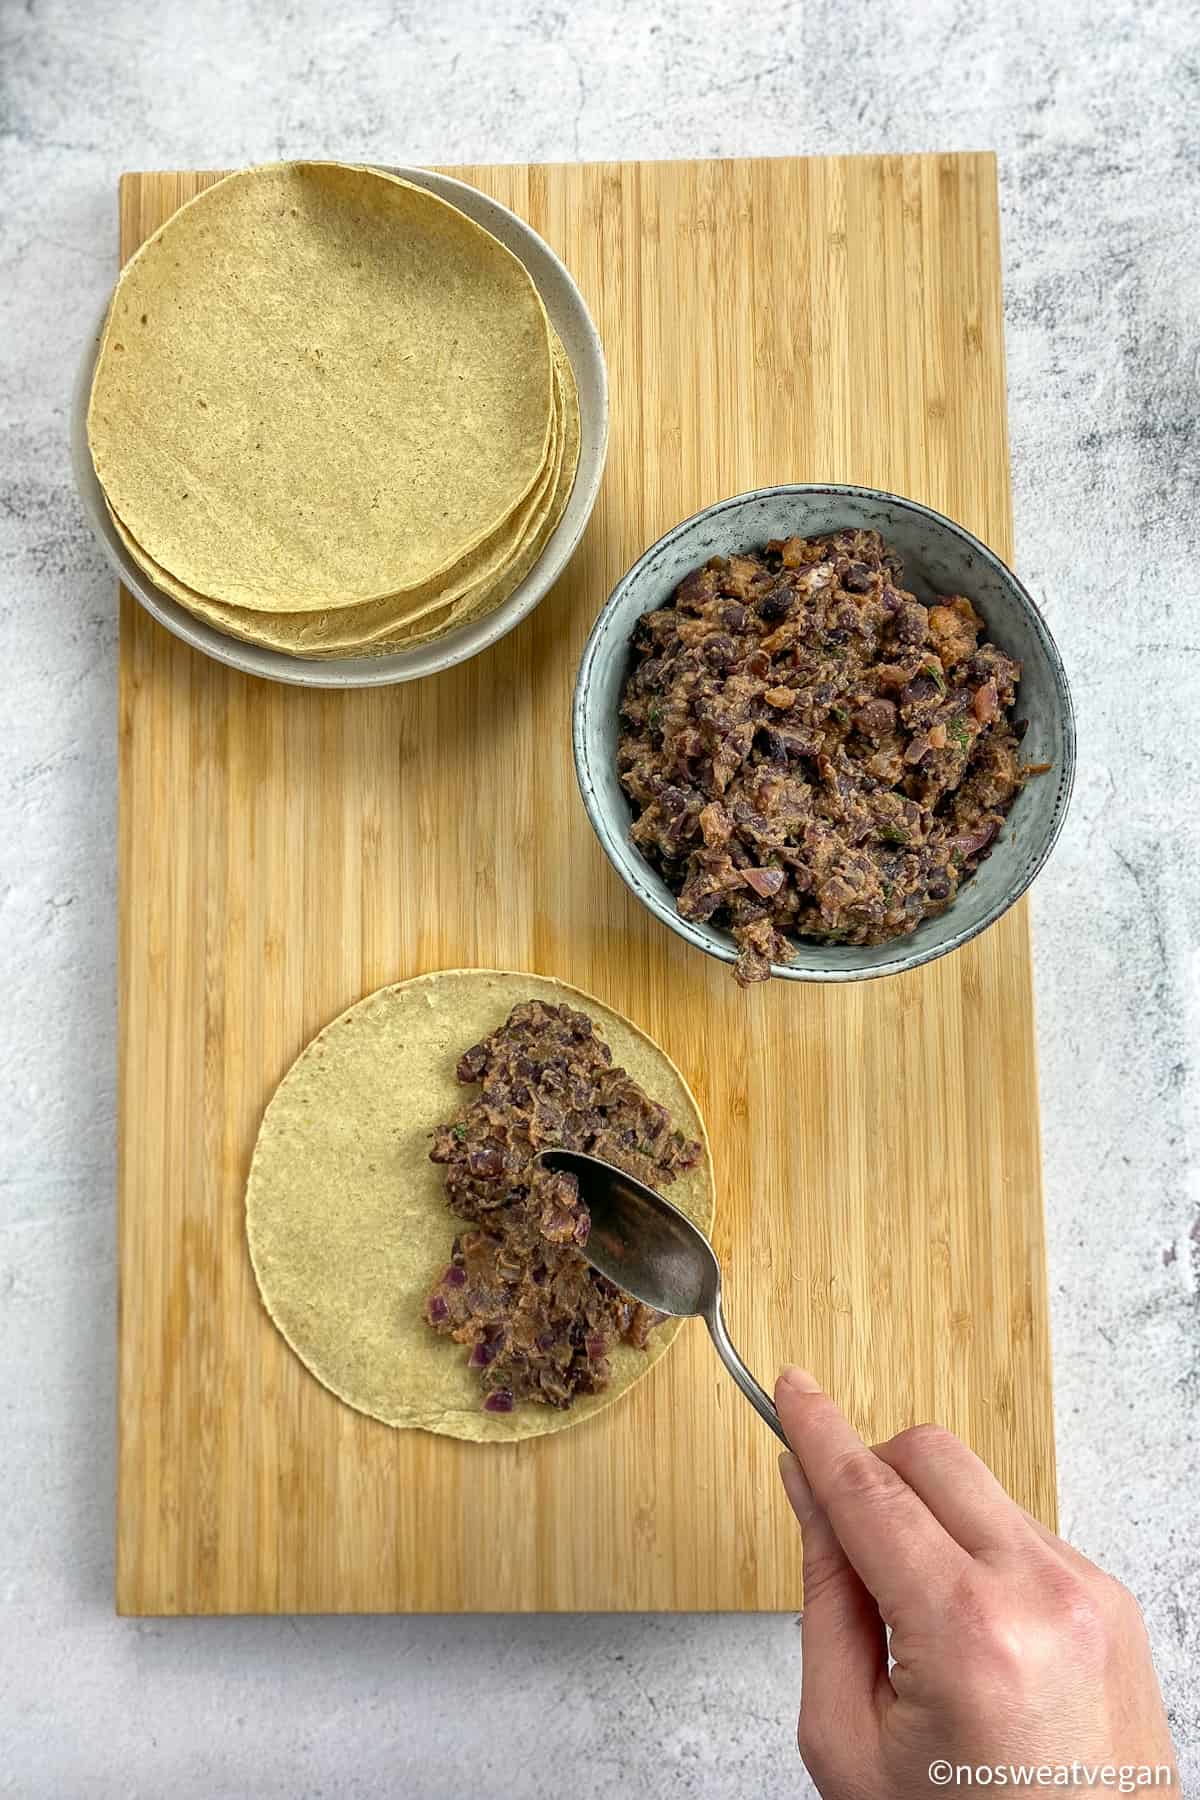 Taco shells, smashed black beans, and a hand adding the black bean filling to a taco.